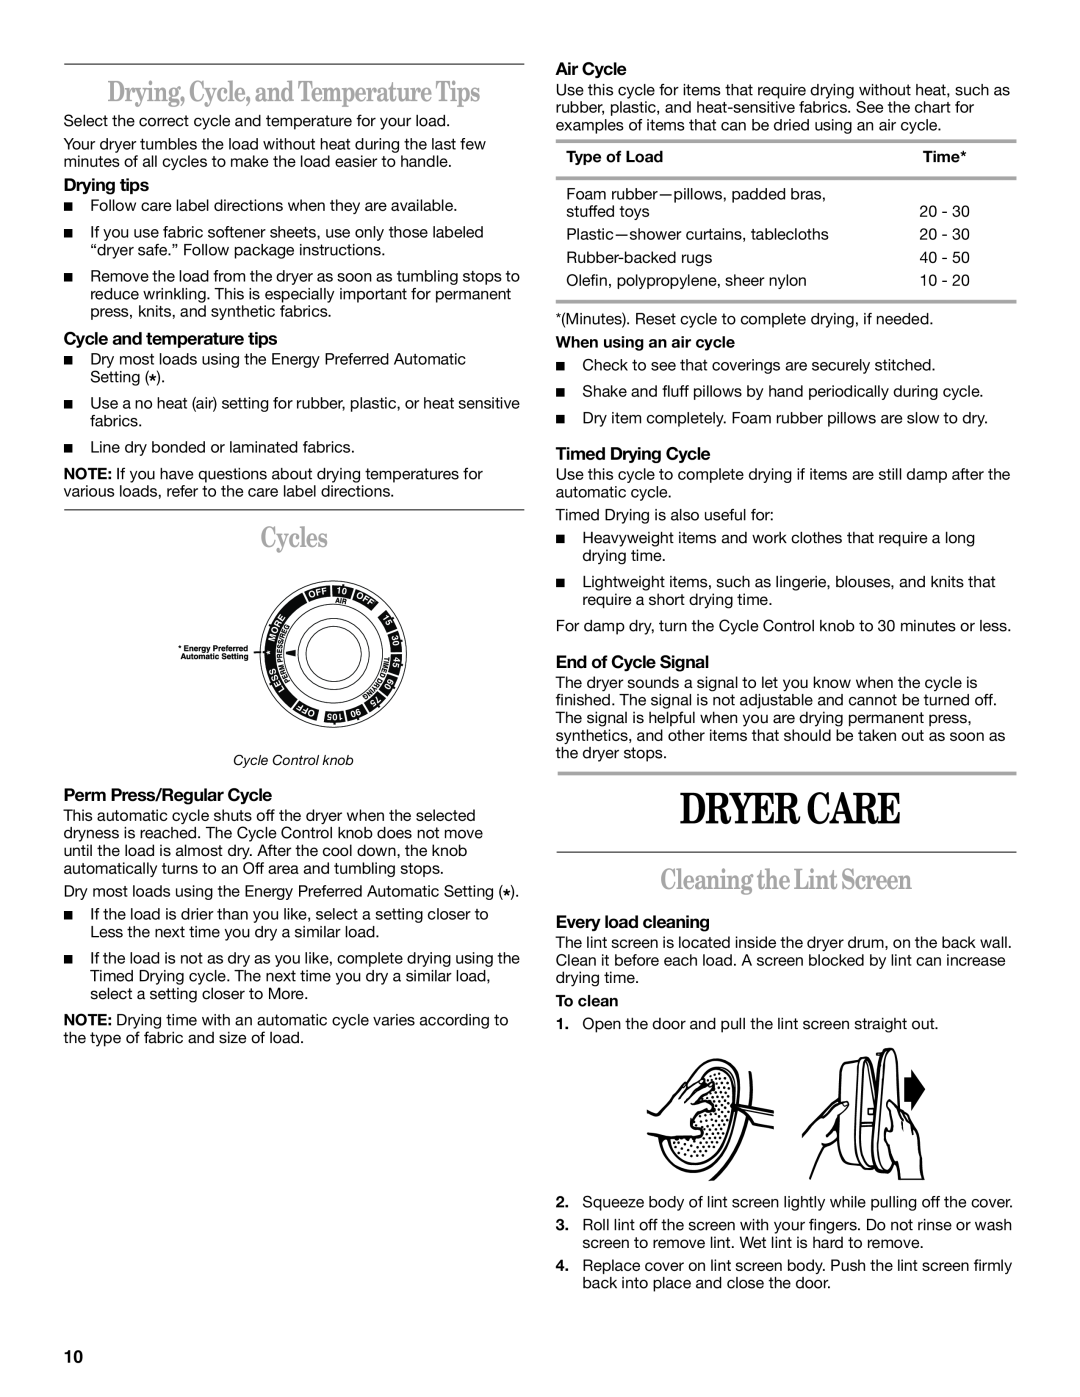 Whirlpool 3406879 manual Dryer Care, Drying, Cycle, and Temperature Tips, Cycles, Cleaning the Lint Screen, Drying tips 